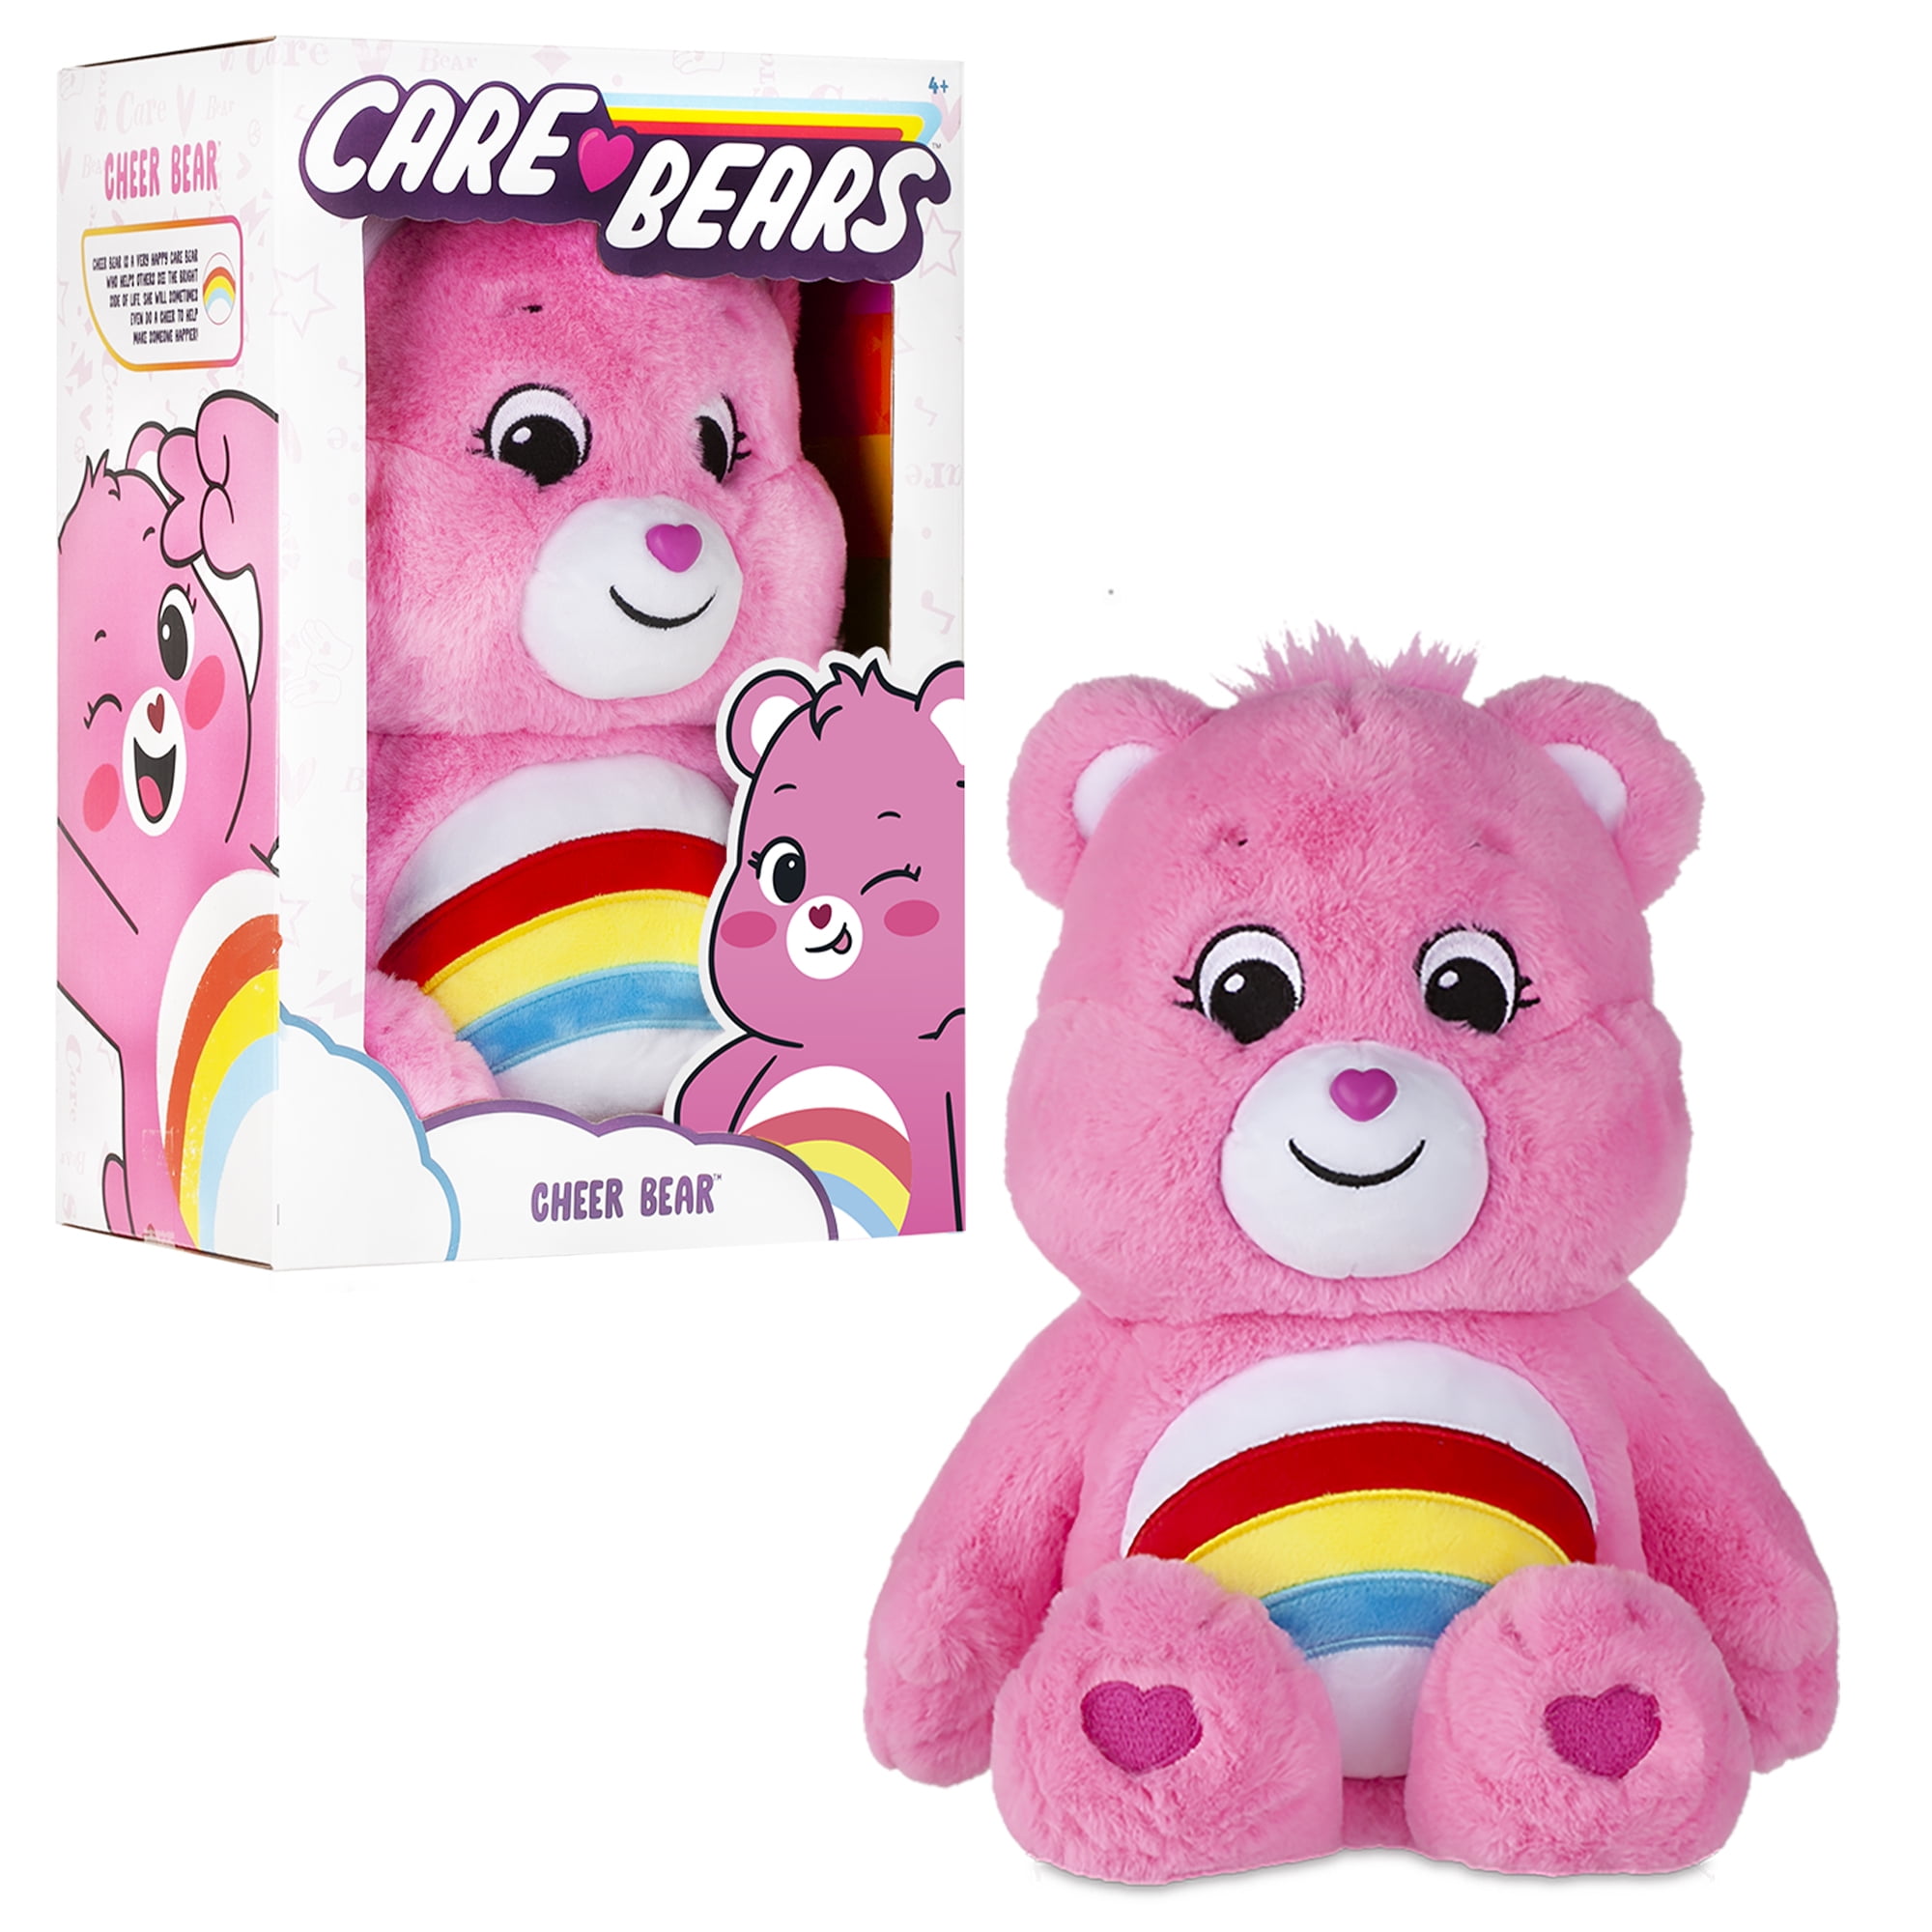 Details about   Fit' n Fun Carebears Pink Rainbow Bears New in Box 